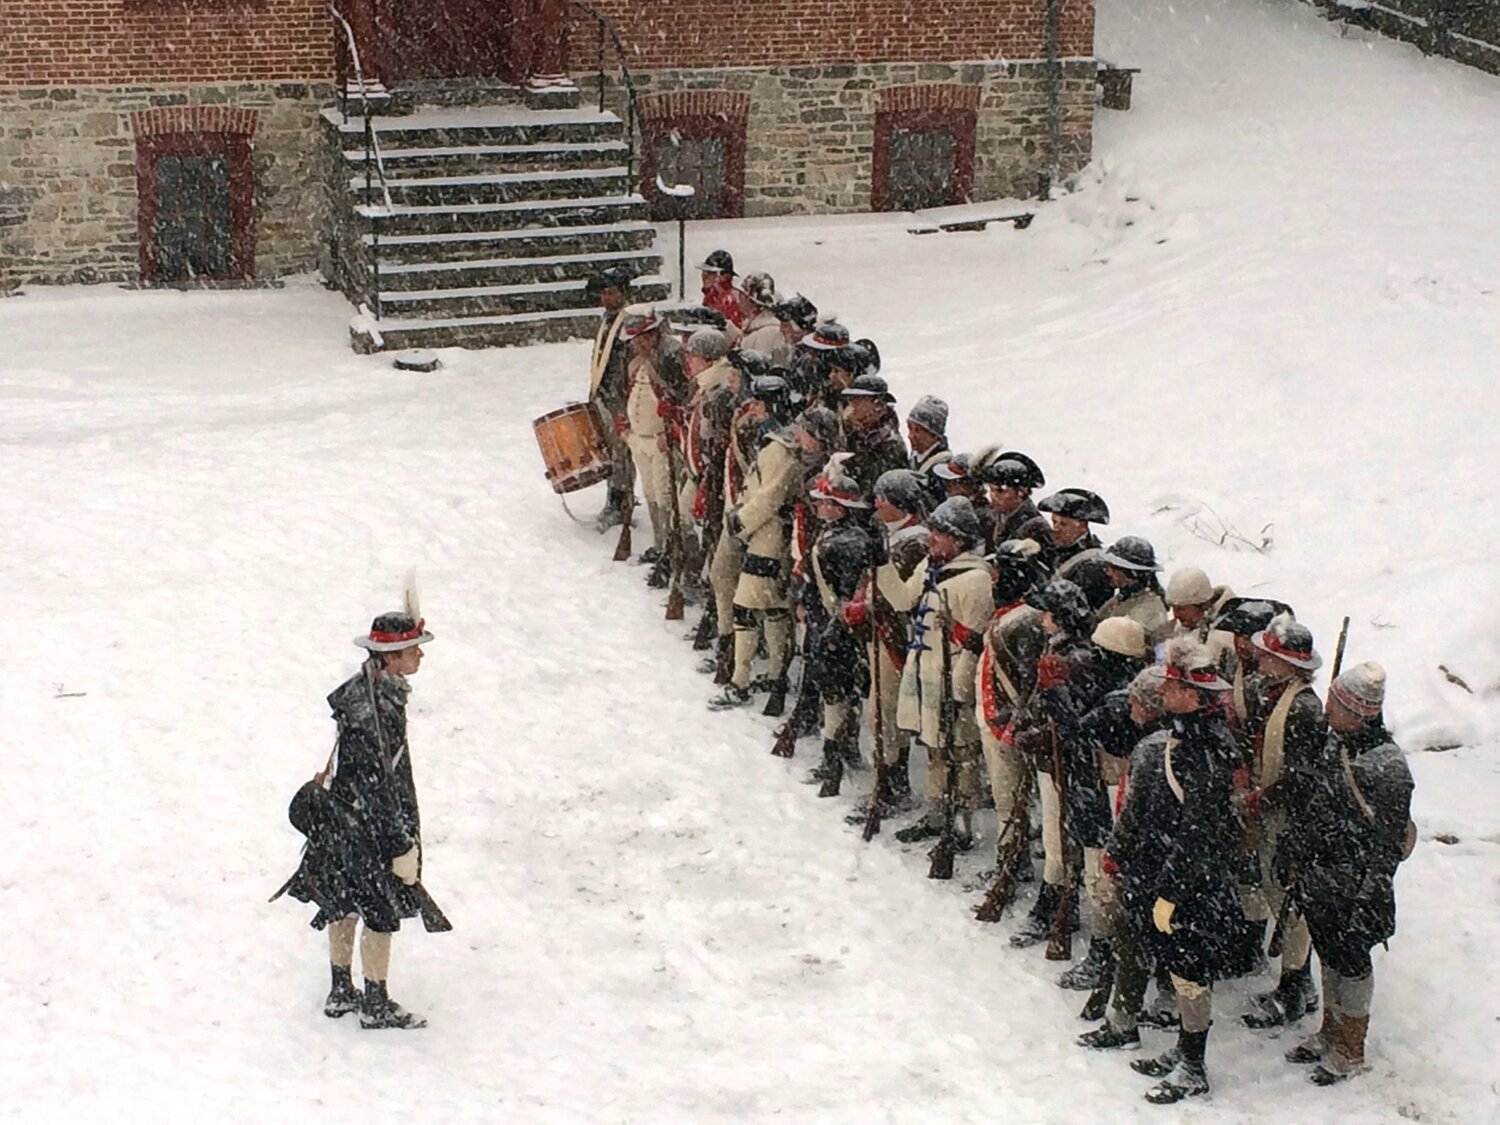 Reenactors will march from the Old Barracks Museum in Trenton to Princeton Battlefield during the early morning hours Dec. 31.